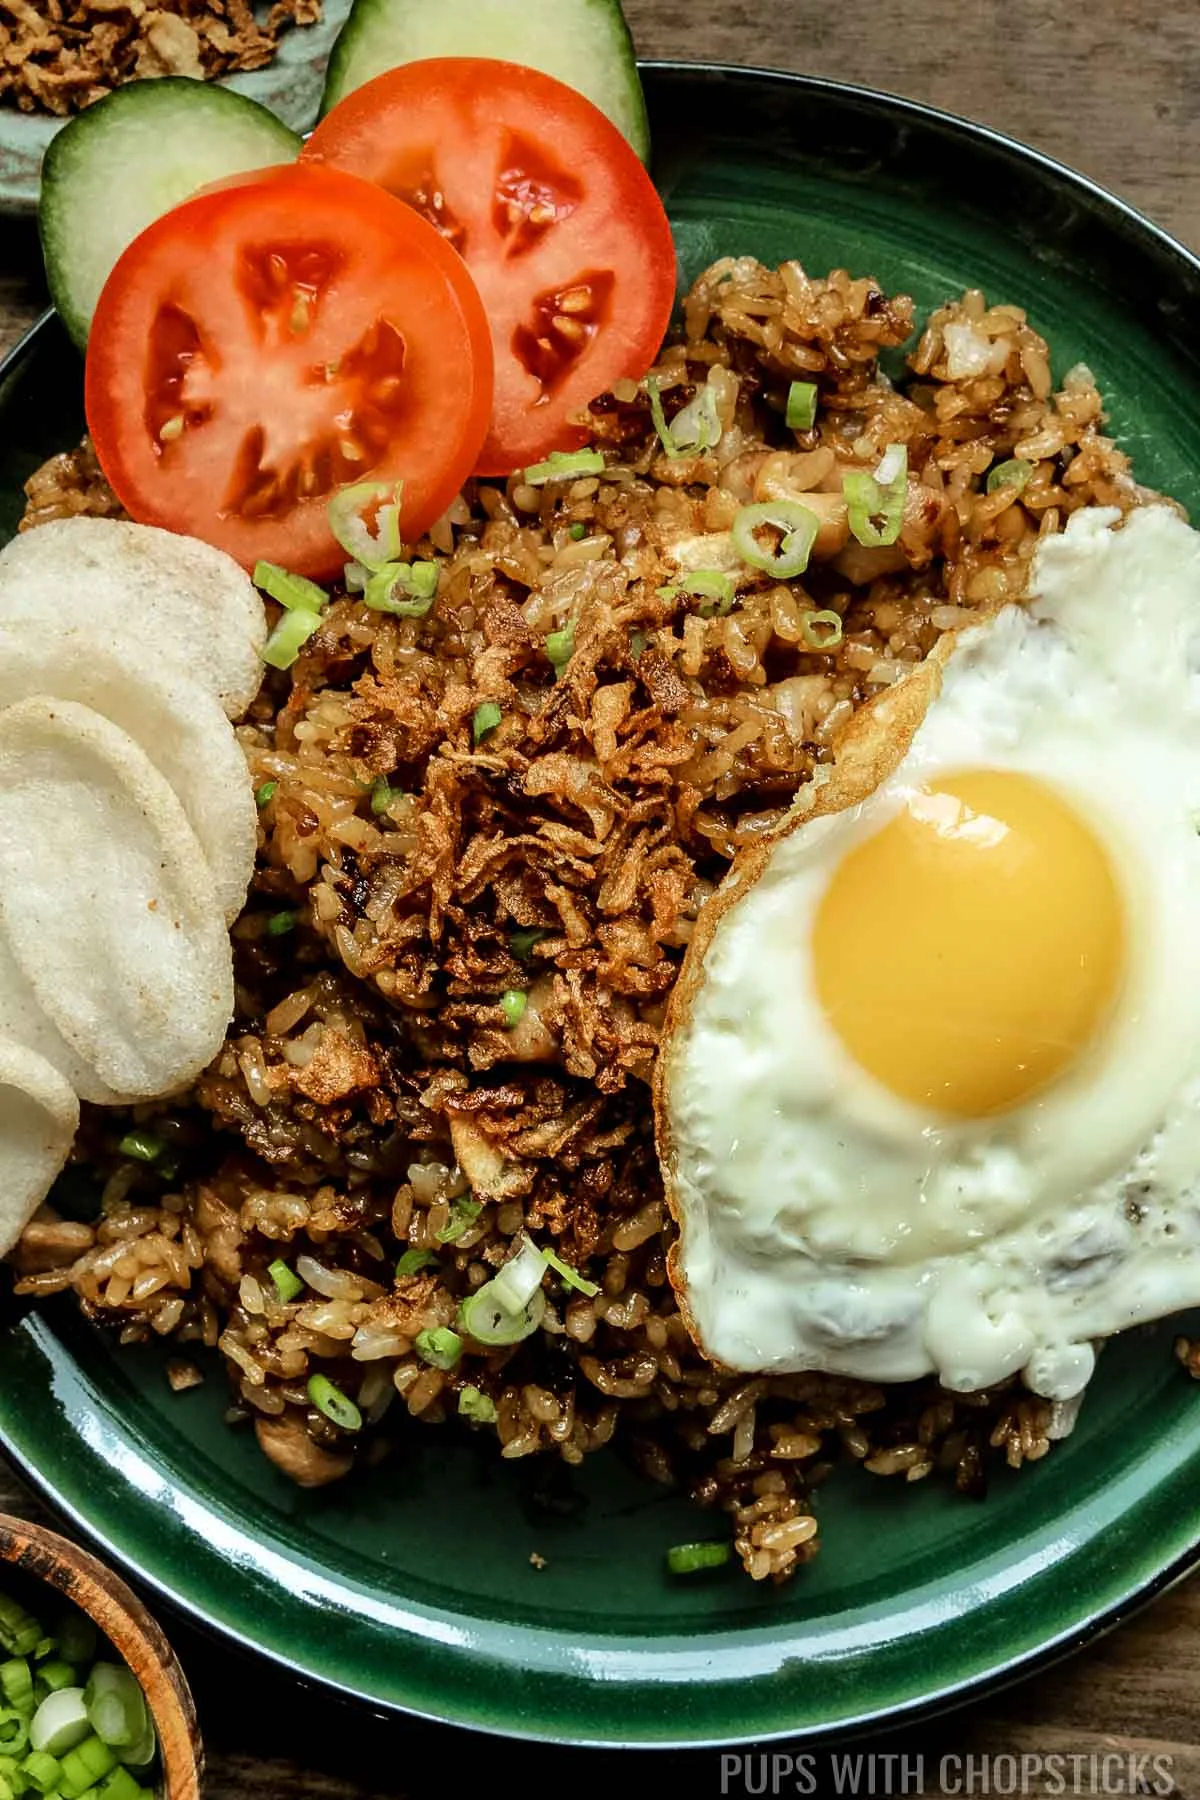 Closeup of nasi goreng (Indonesian fried rice) with a fried egg on a green plate.